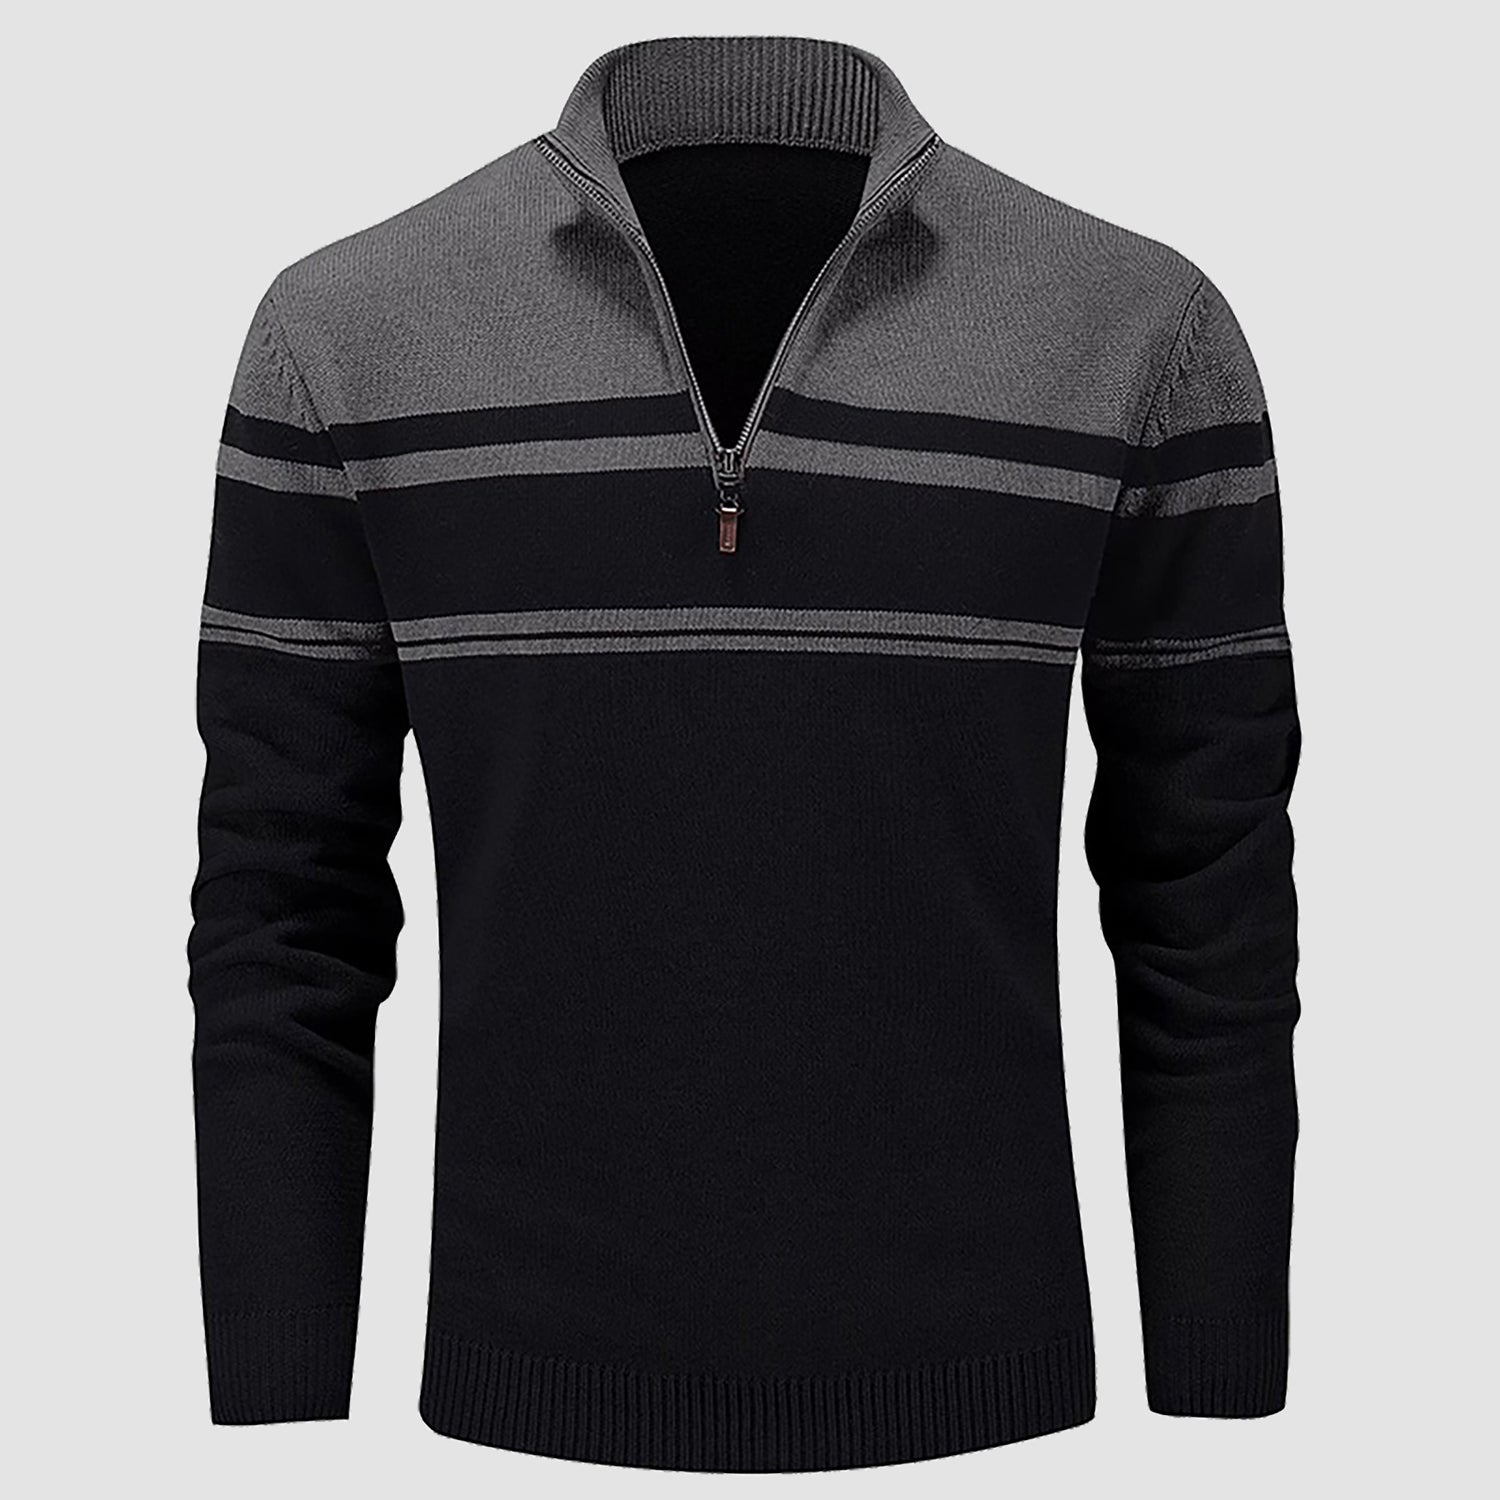 Men's Sweater Half Zipper Turtleneck Warm Pullover Slim Fit Casual Comfortable Striped Knitted Sweaters